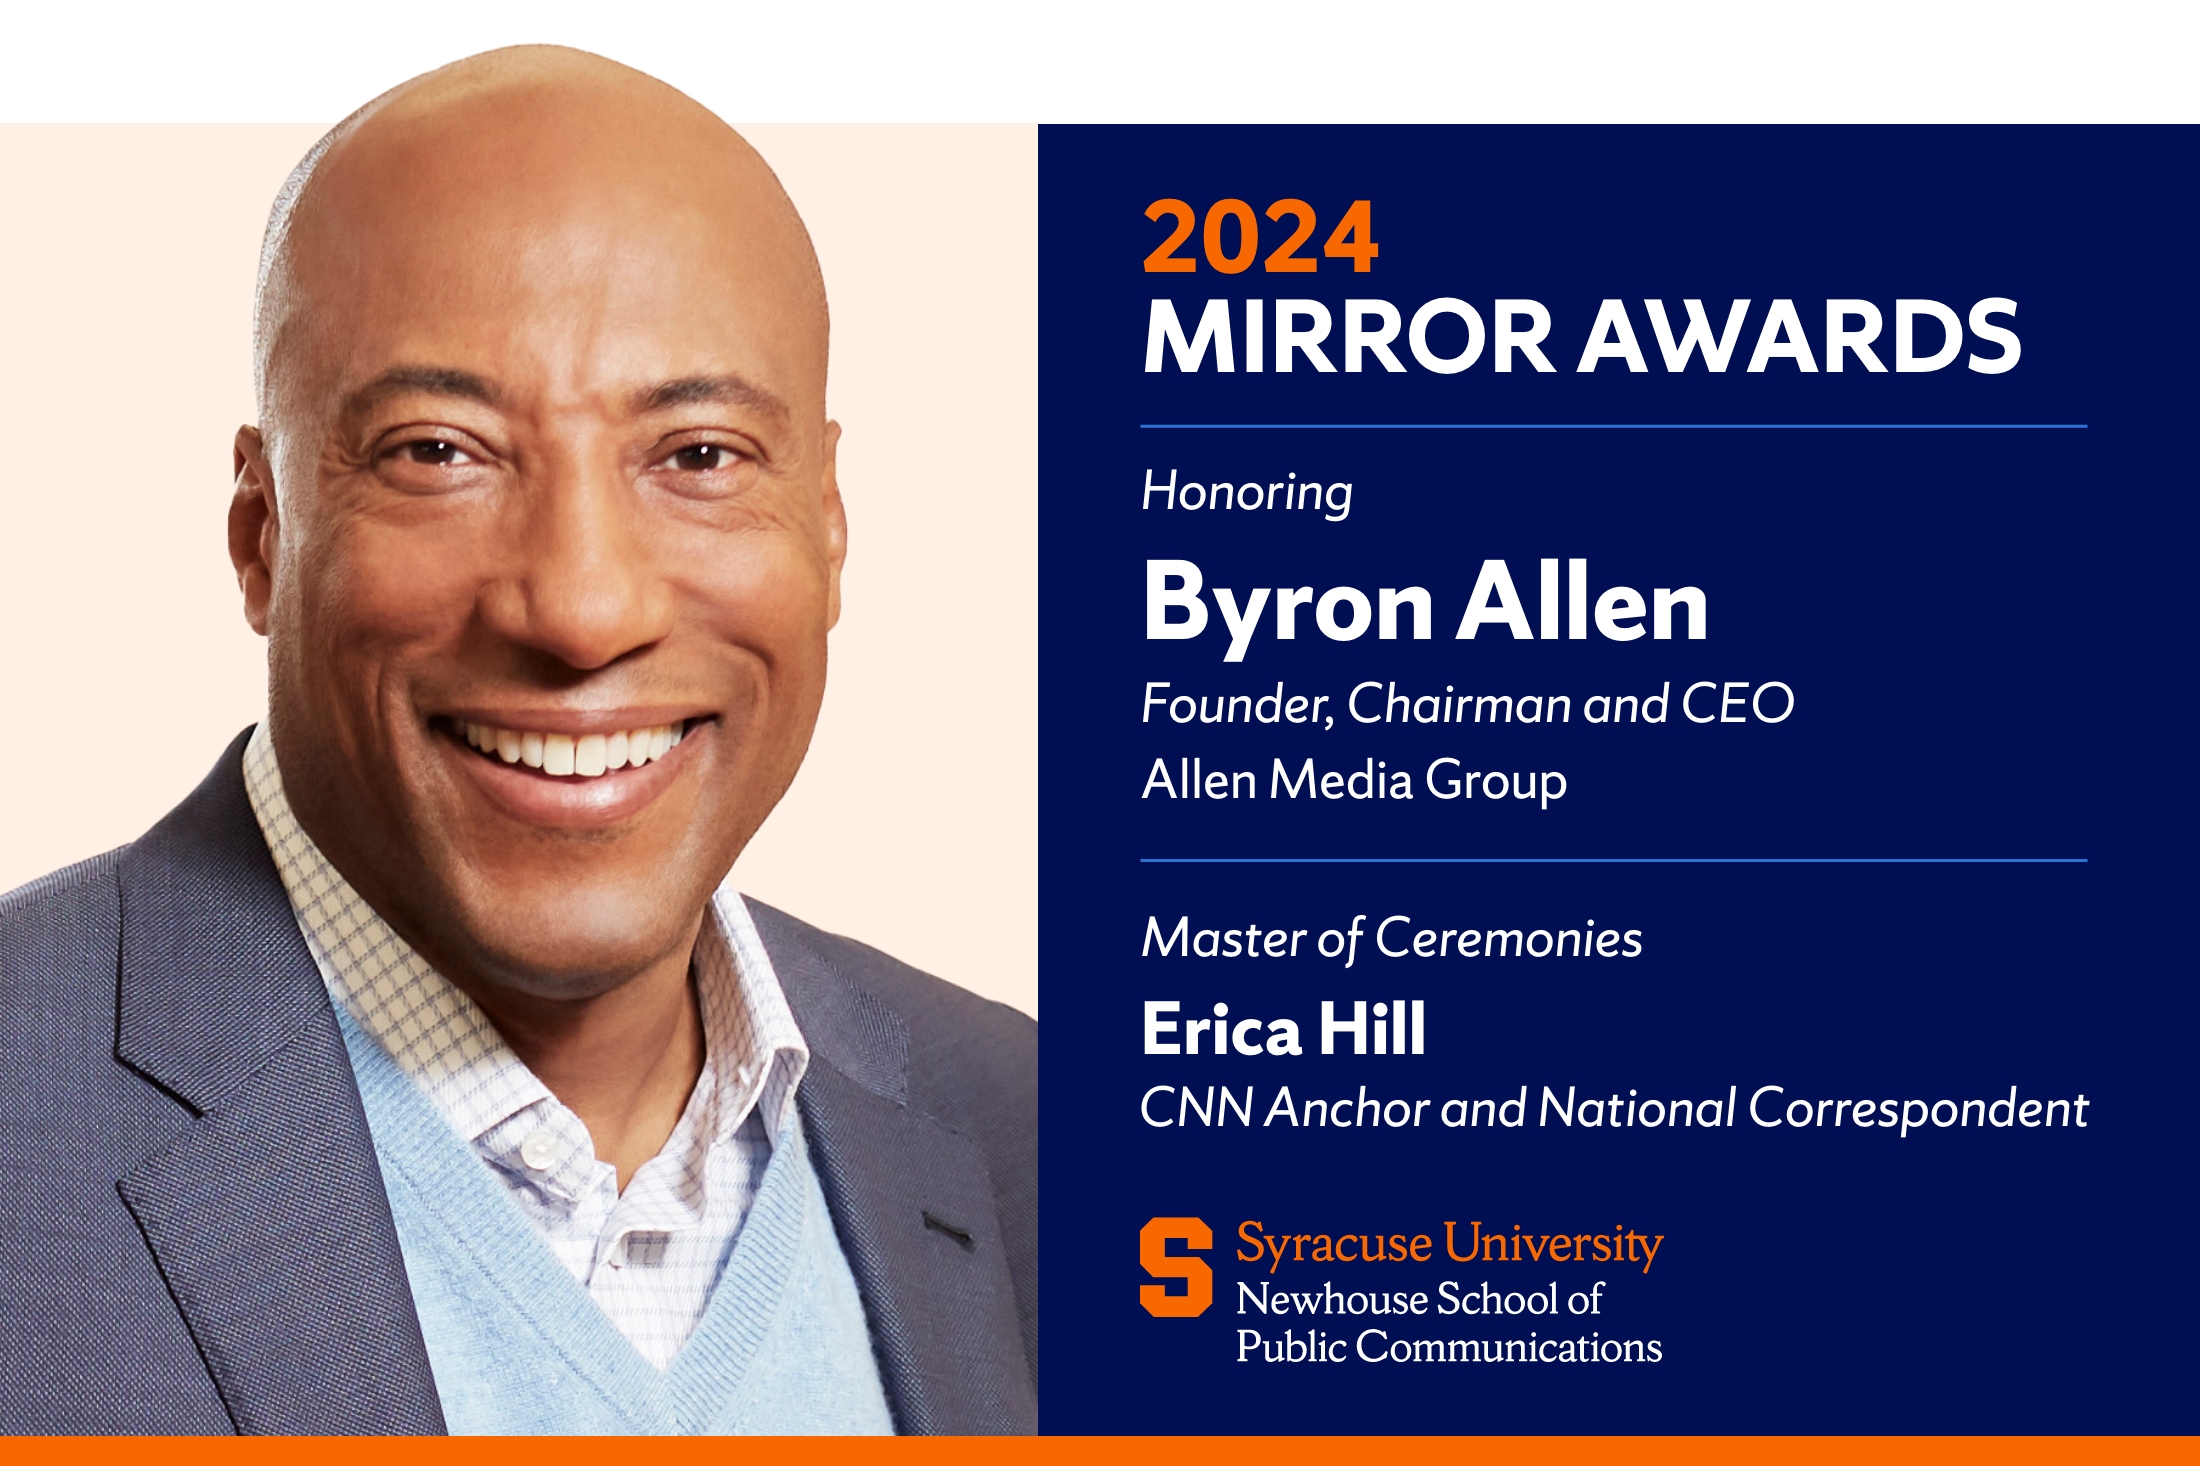 image with the headshot of a person on the left side and on the right side words "2024 Mirror Awards Honoring Byron Allen Founder Chairman and CEO Allen Media Group" and underneath "Master of Ceremonies Erica Hill CNN anchor and national correspondent"